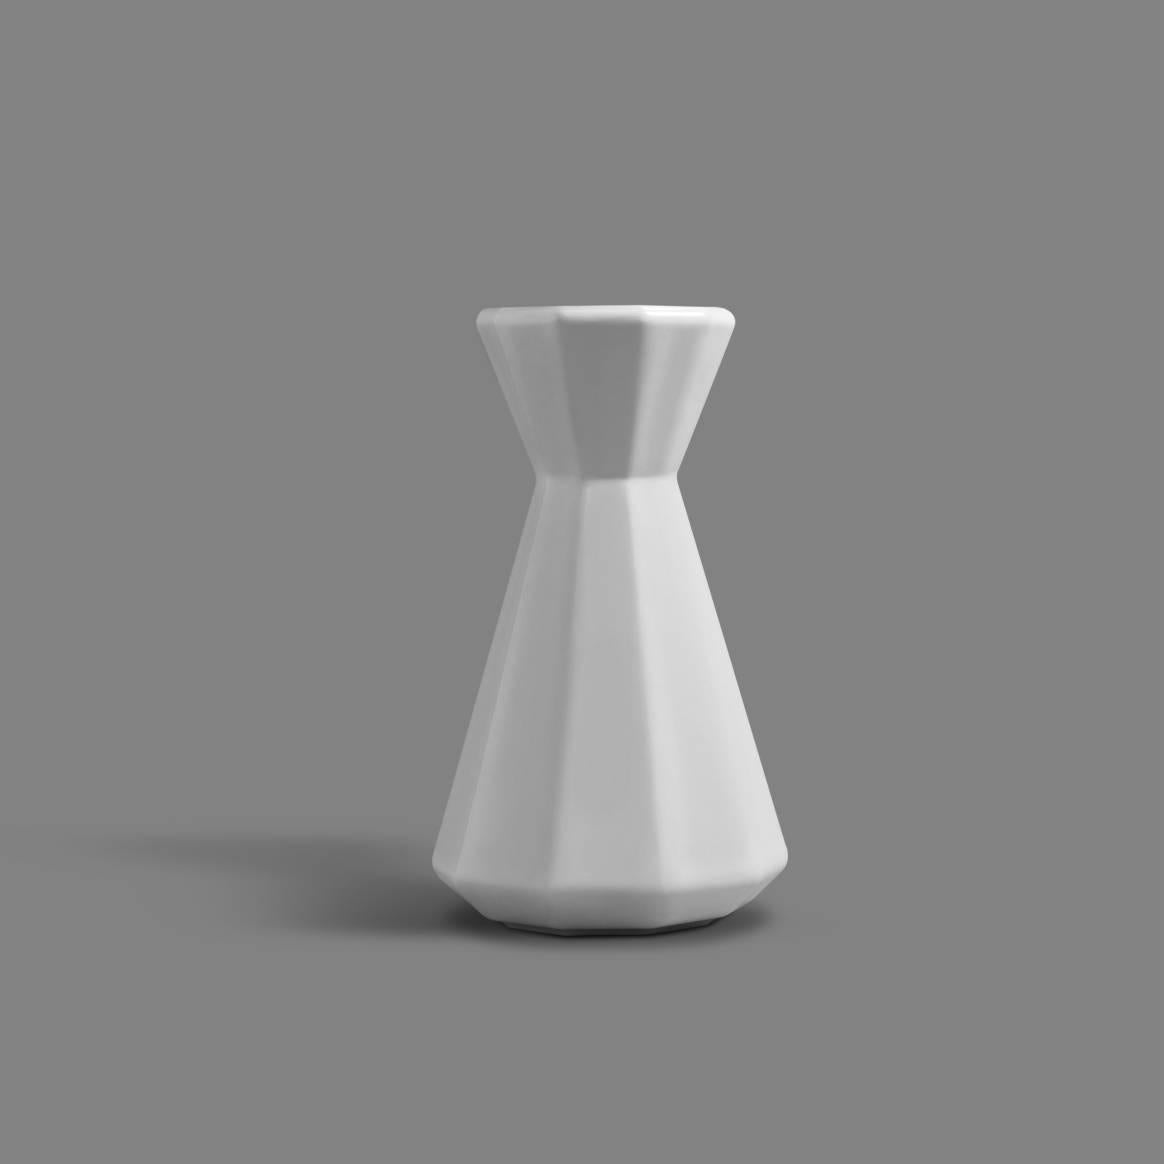 This refined, geometric carafe set was designed to embody the pleasure of sharing something to drink - a stackable carafe and cup set whose lines and form emulate its eponymous flower, and only possible through 3D printing. Each product is produced